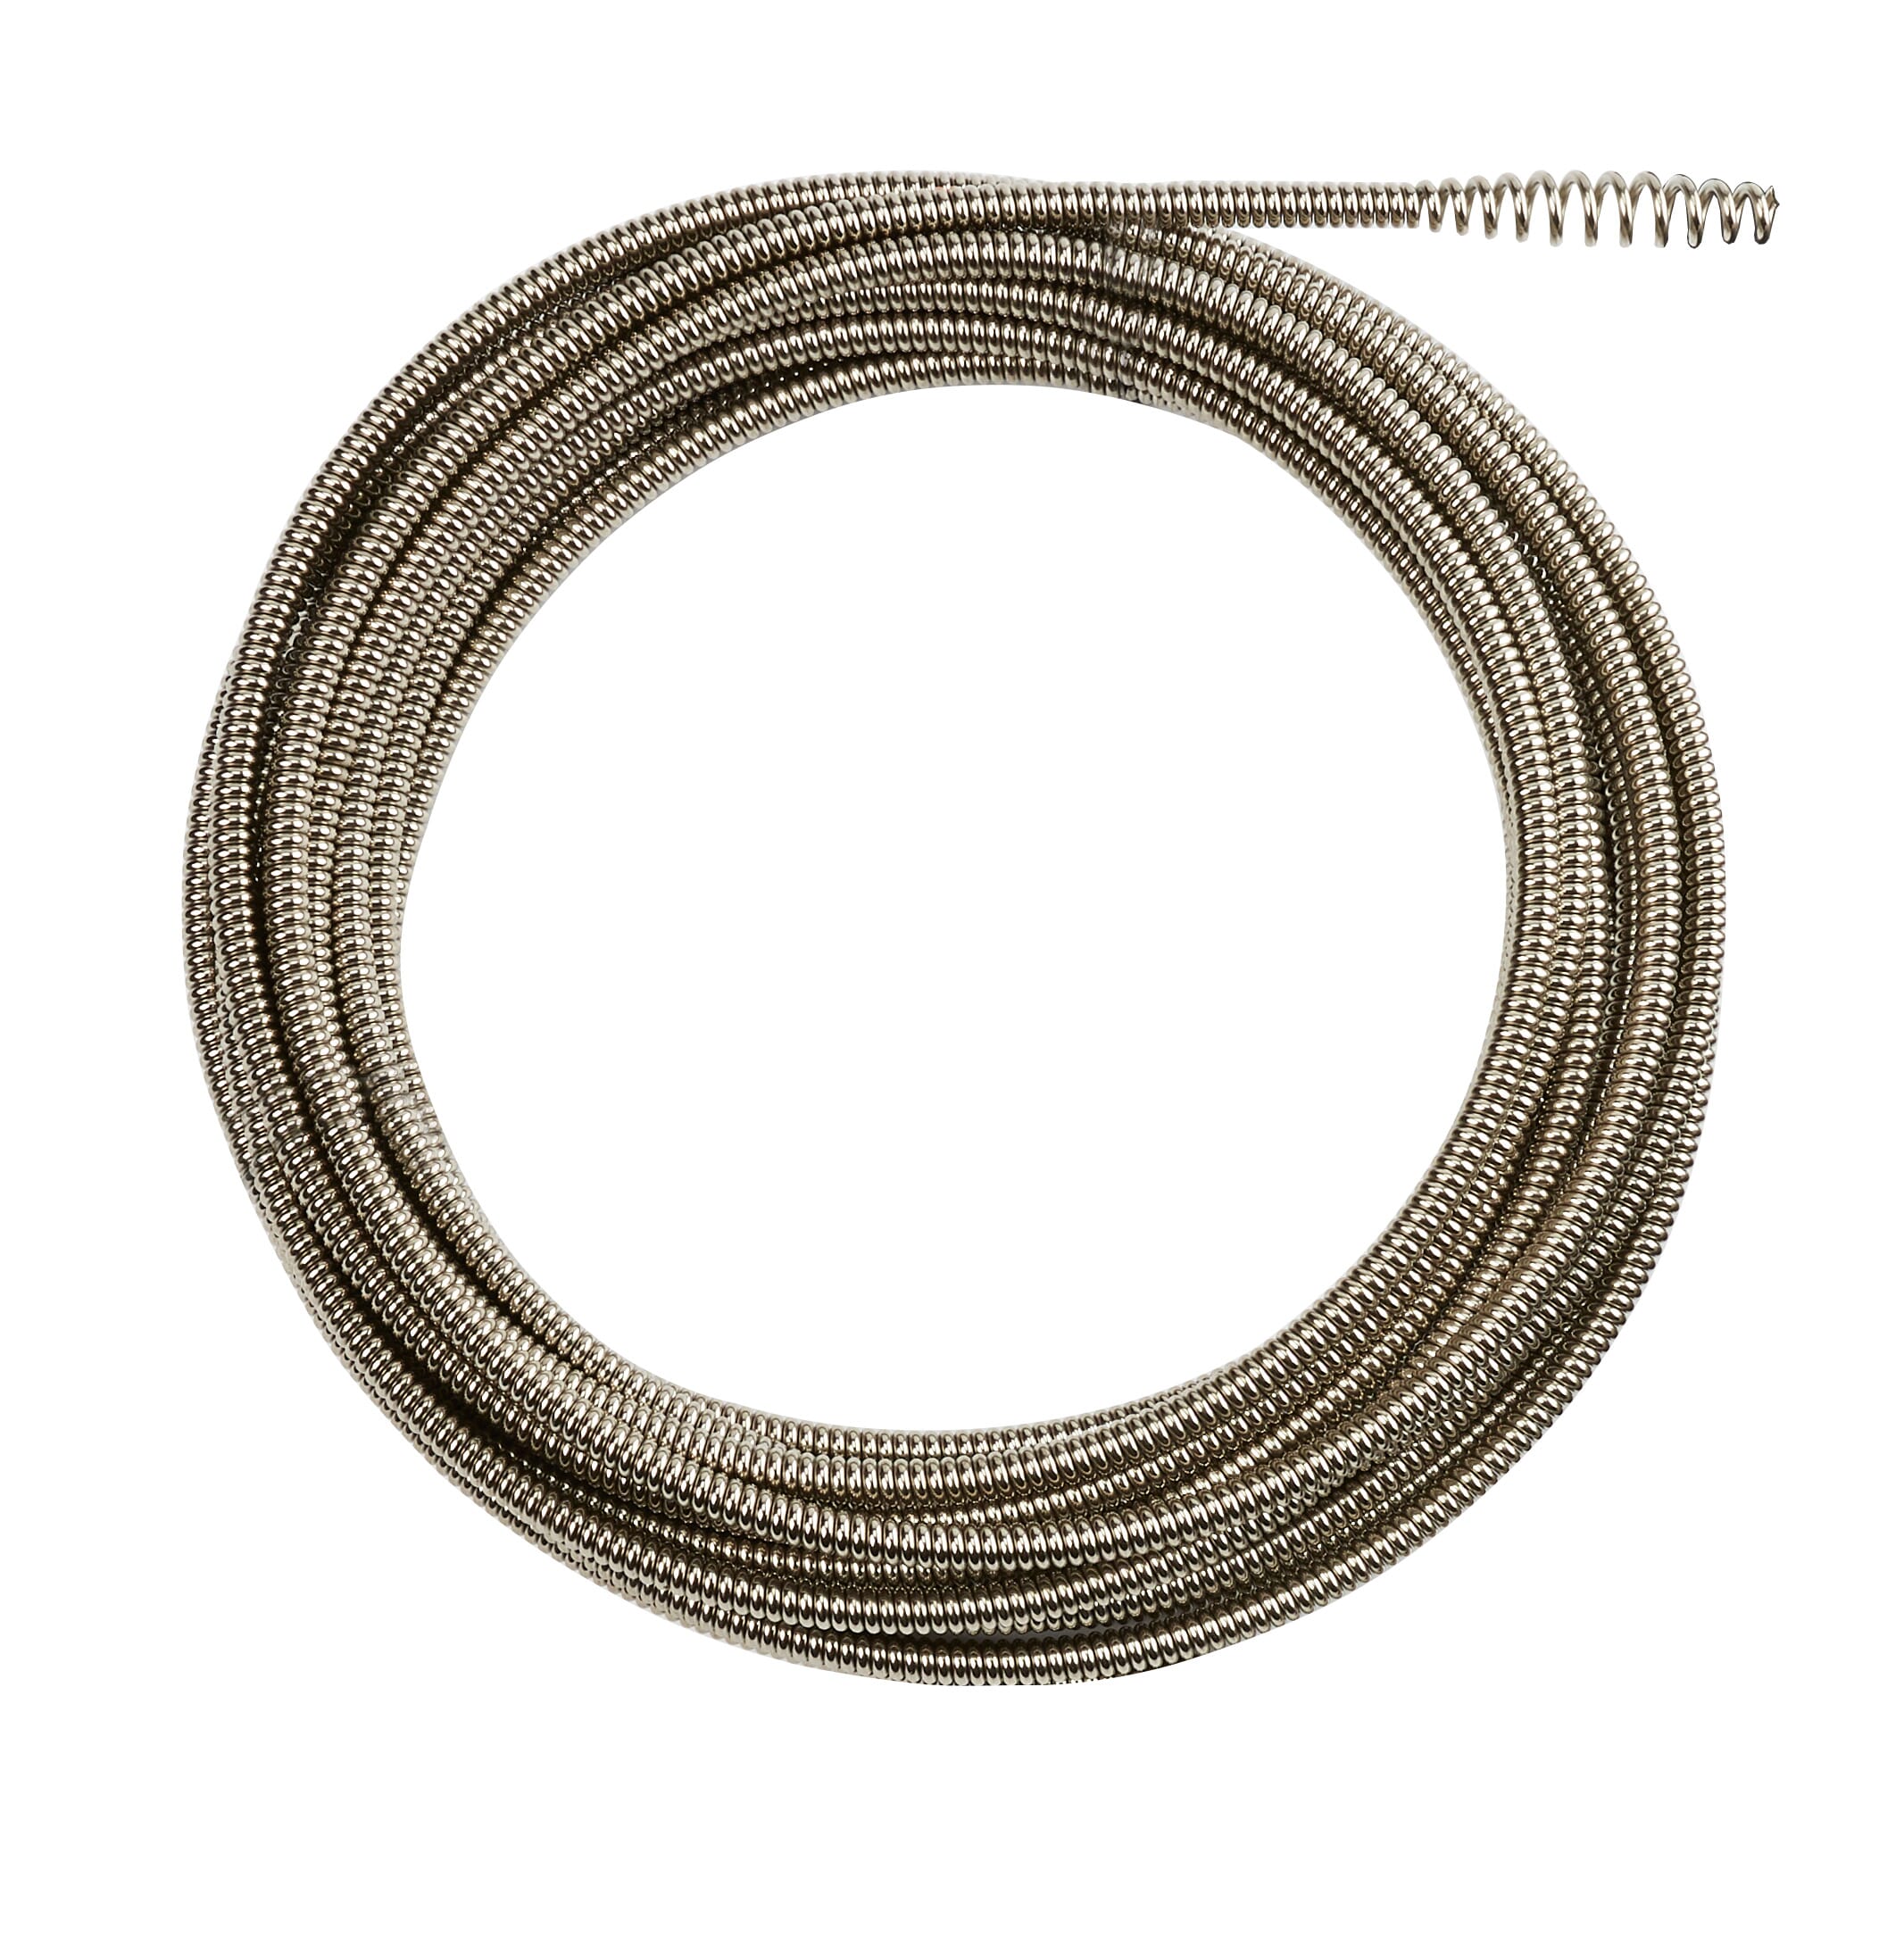 Milwaukee® 48-53-2673 Inner Core Bulb Head Drain Cleaning Cable, 5/16 in, Steel, For Use With Drain Cleaning Machines, 1-1/4 to 2-1/2 in Drain Line